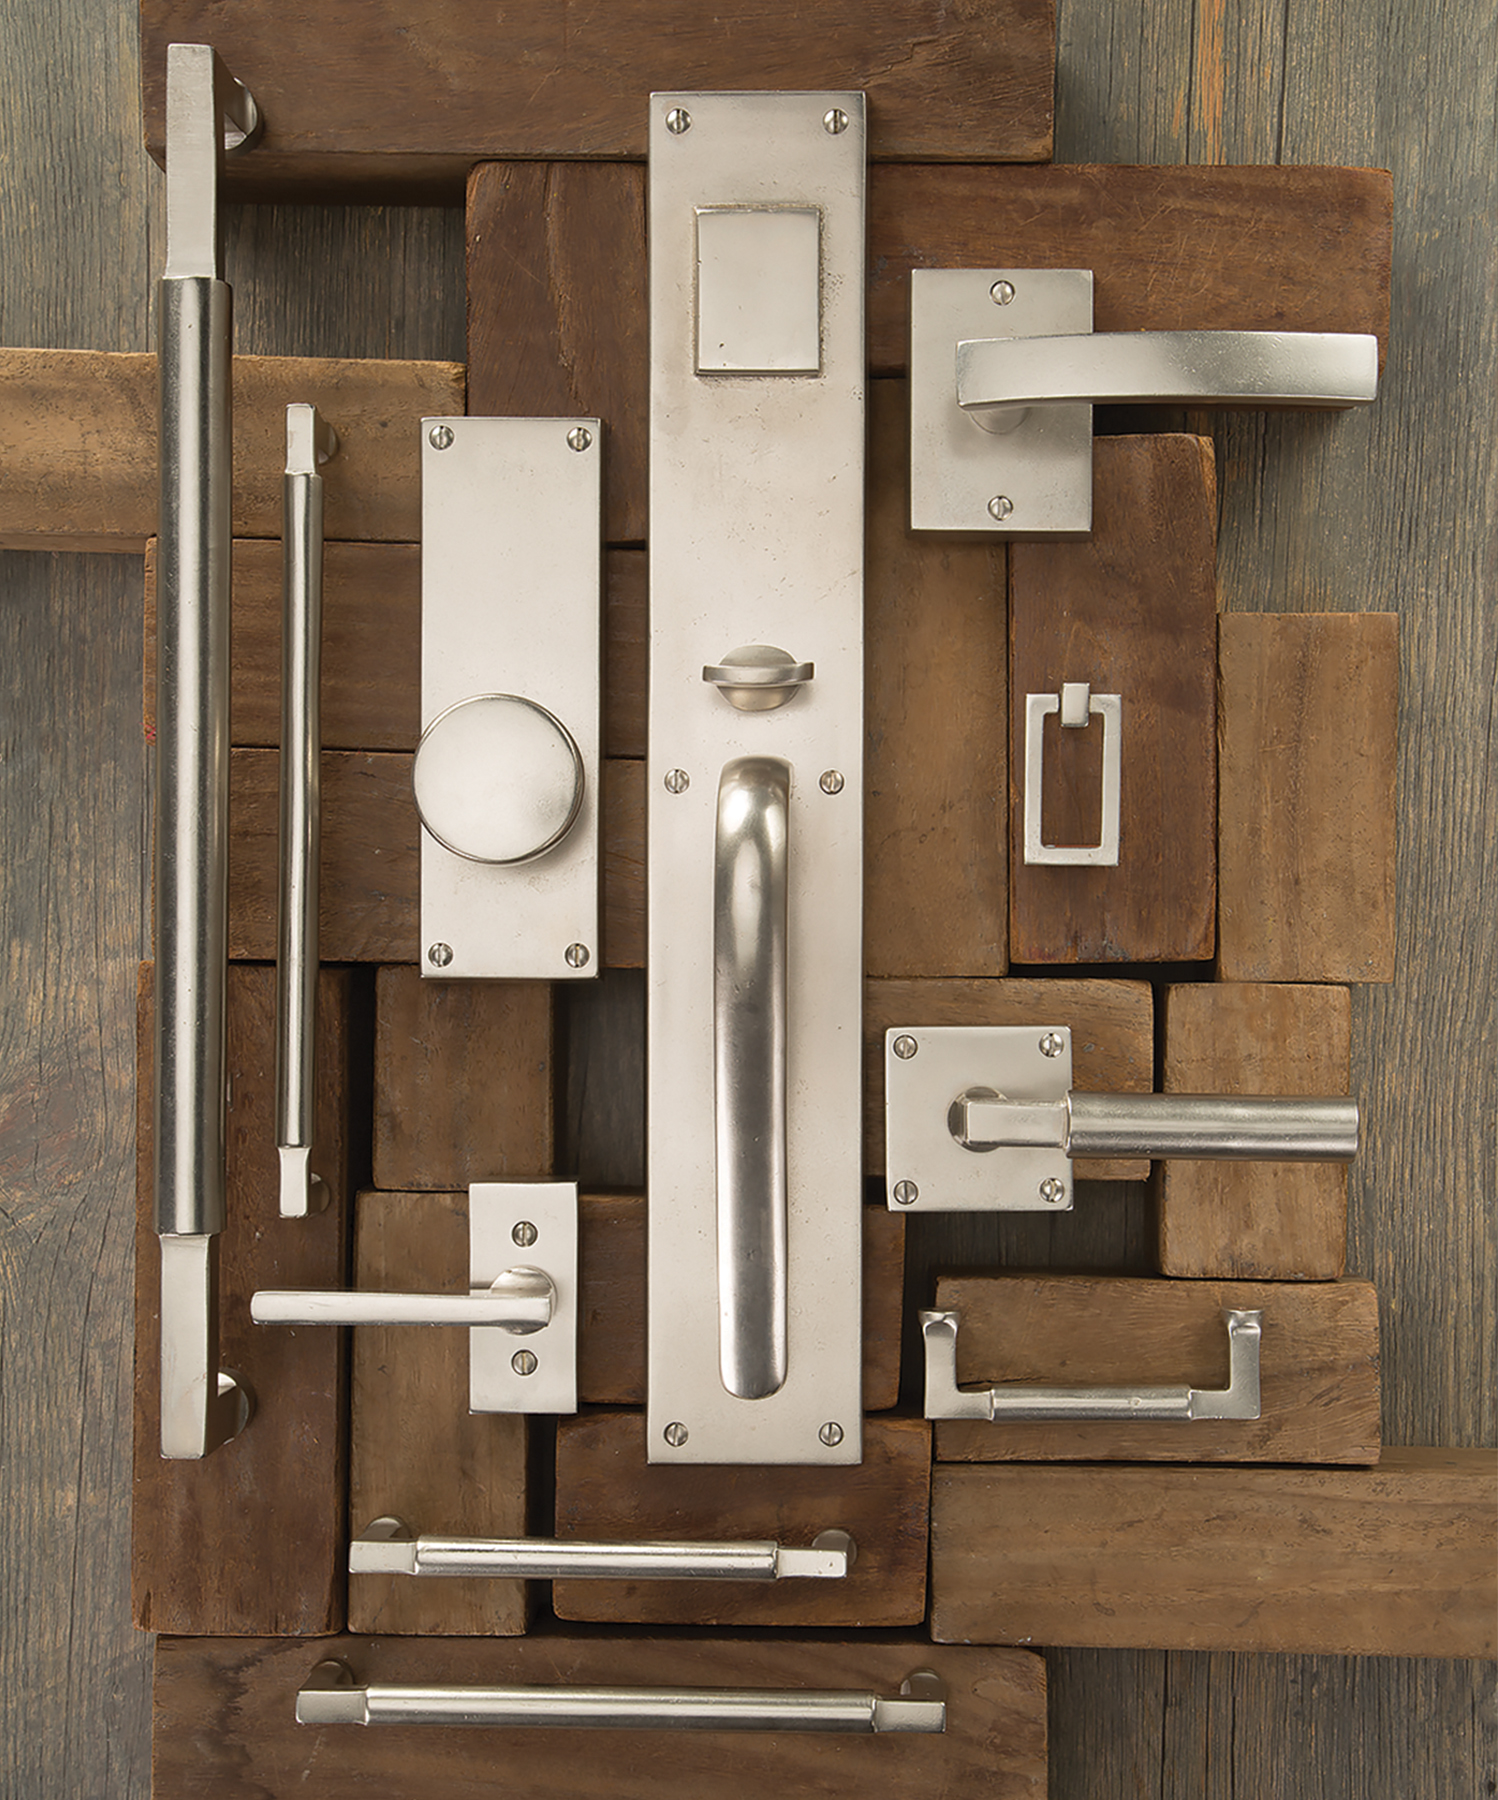 Ashley Norton designer and manufacturer of architectural hardware introduced its Urban Suite collection of architectural ha